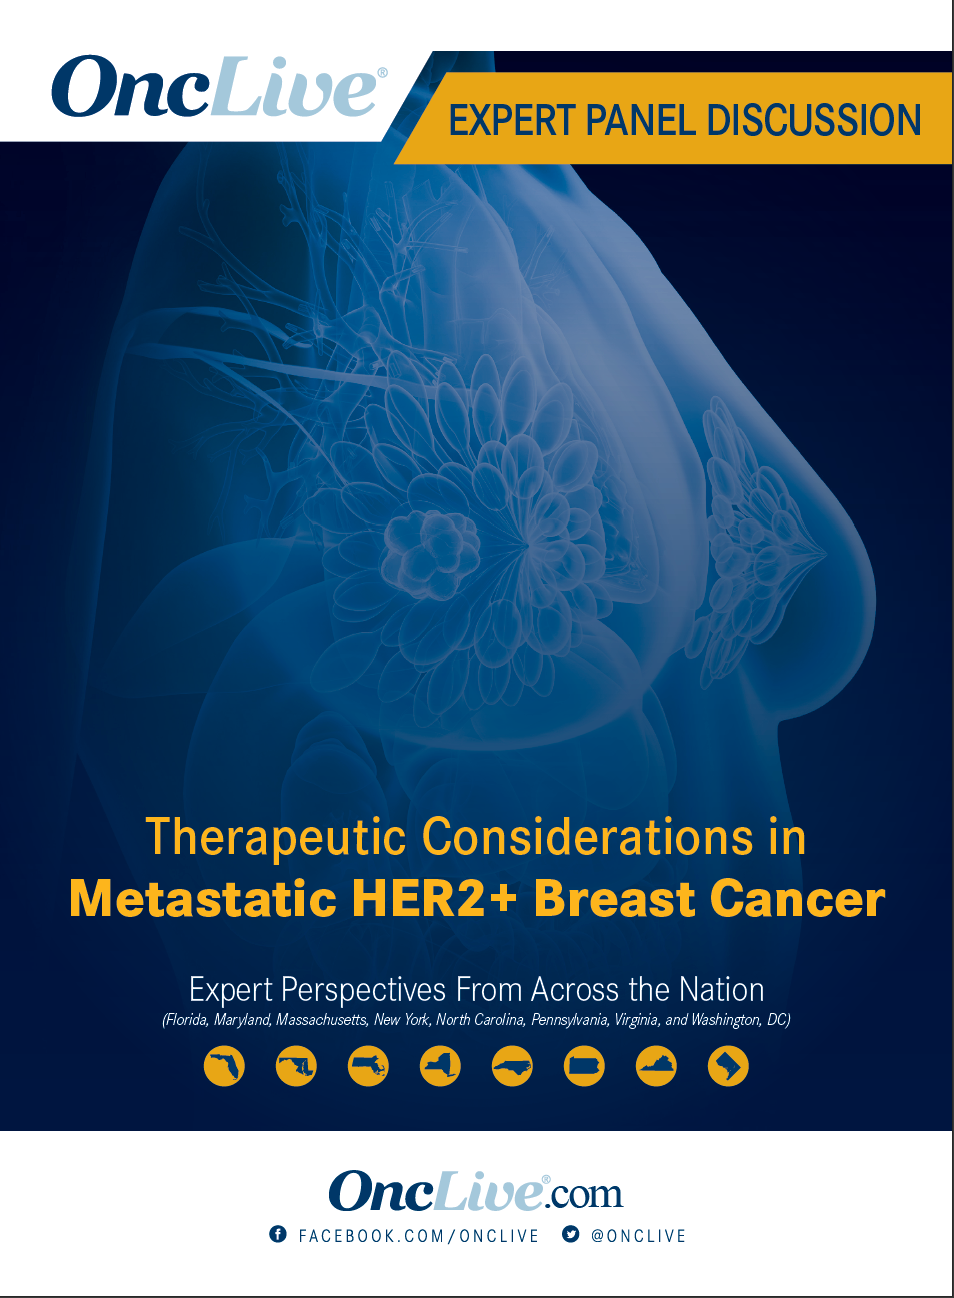 Therapeutic Considerations in Metastatic HER2+ Breast Cancer: Part 2